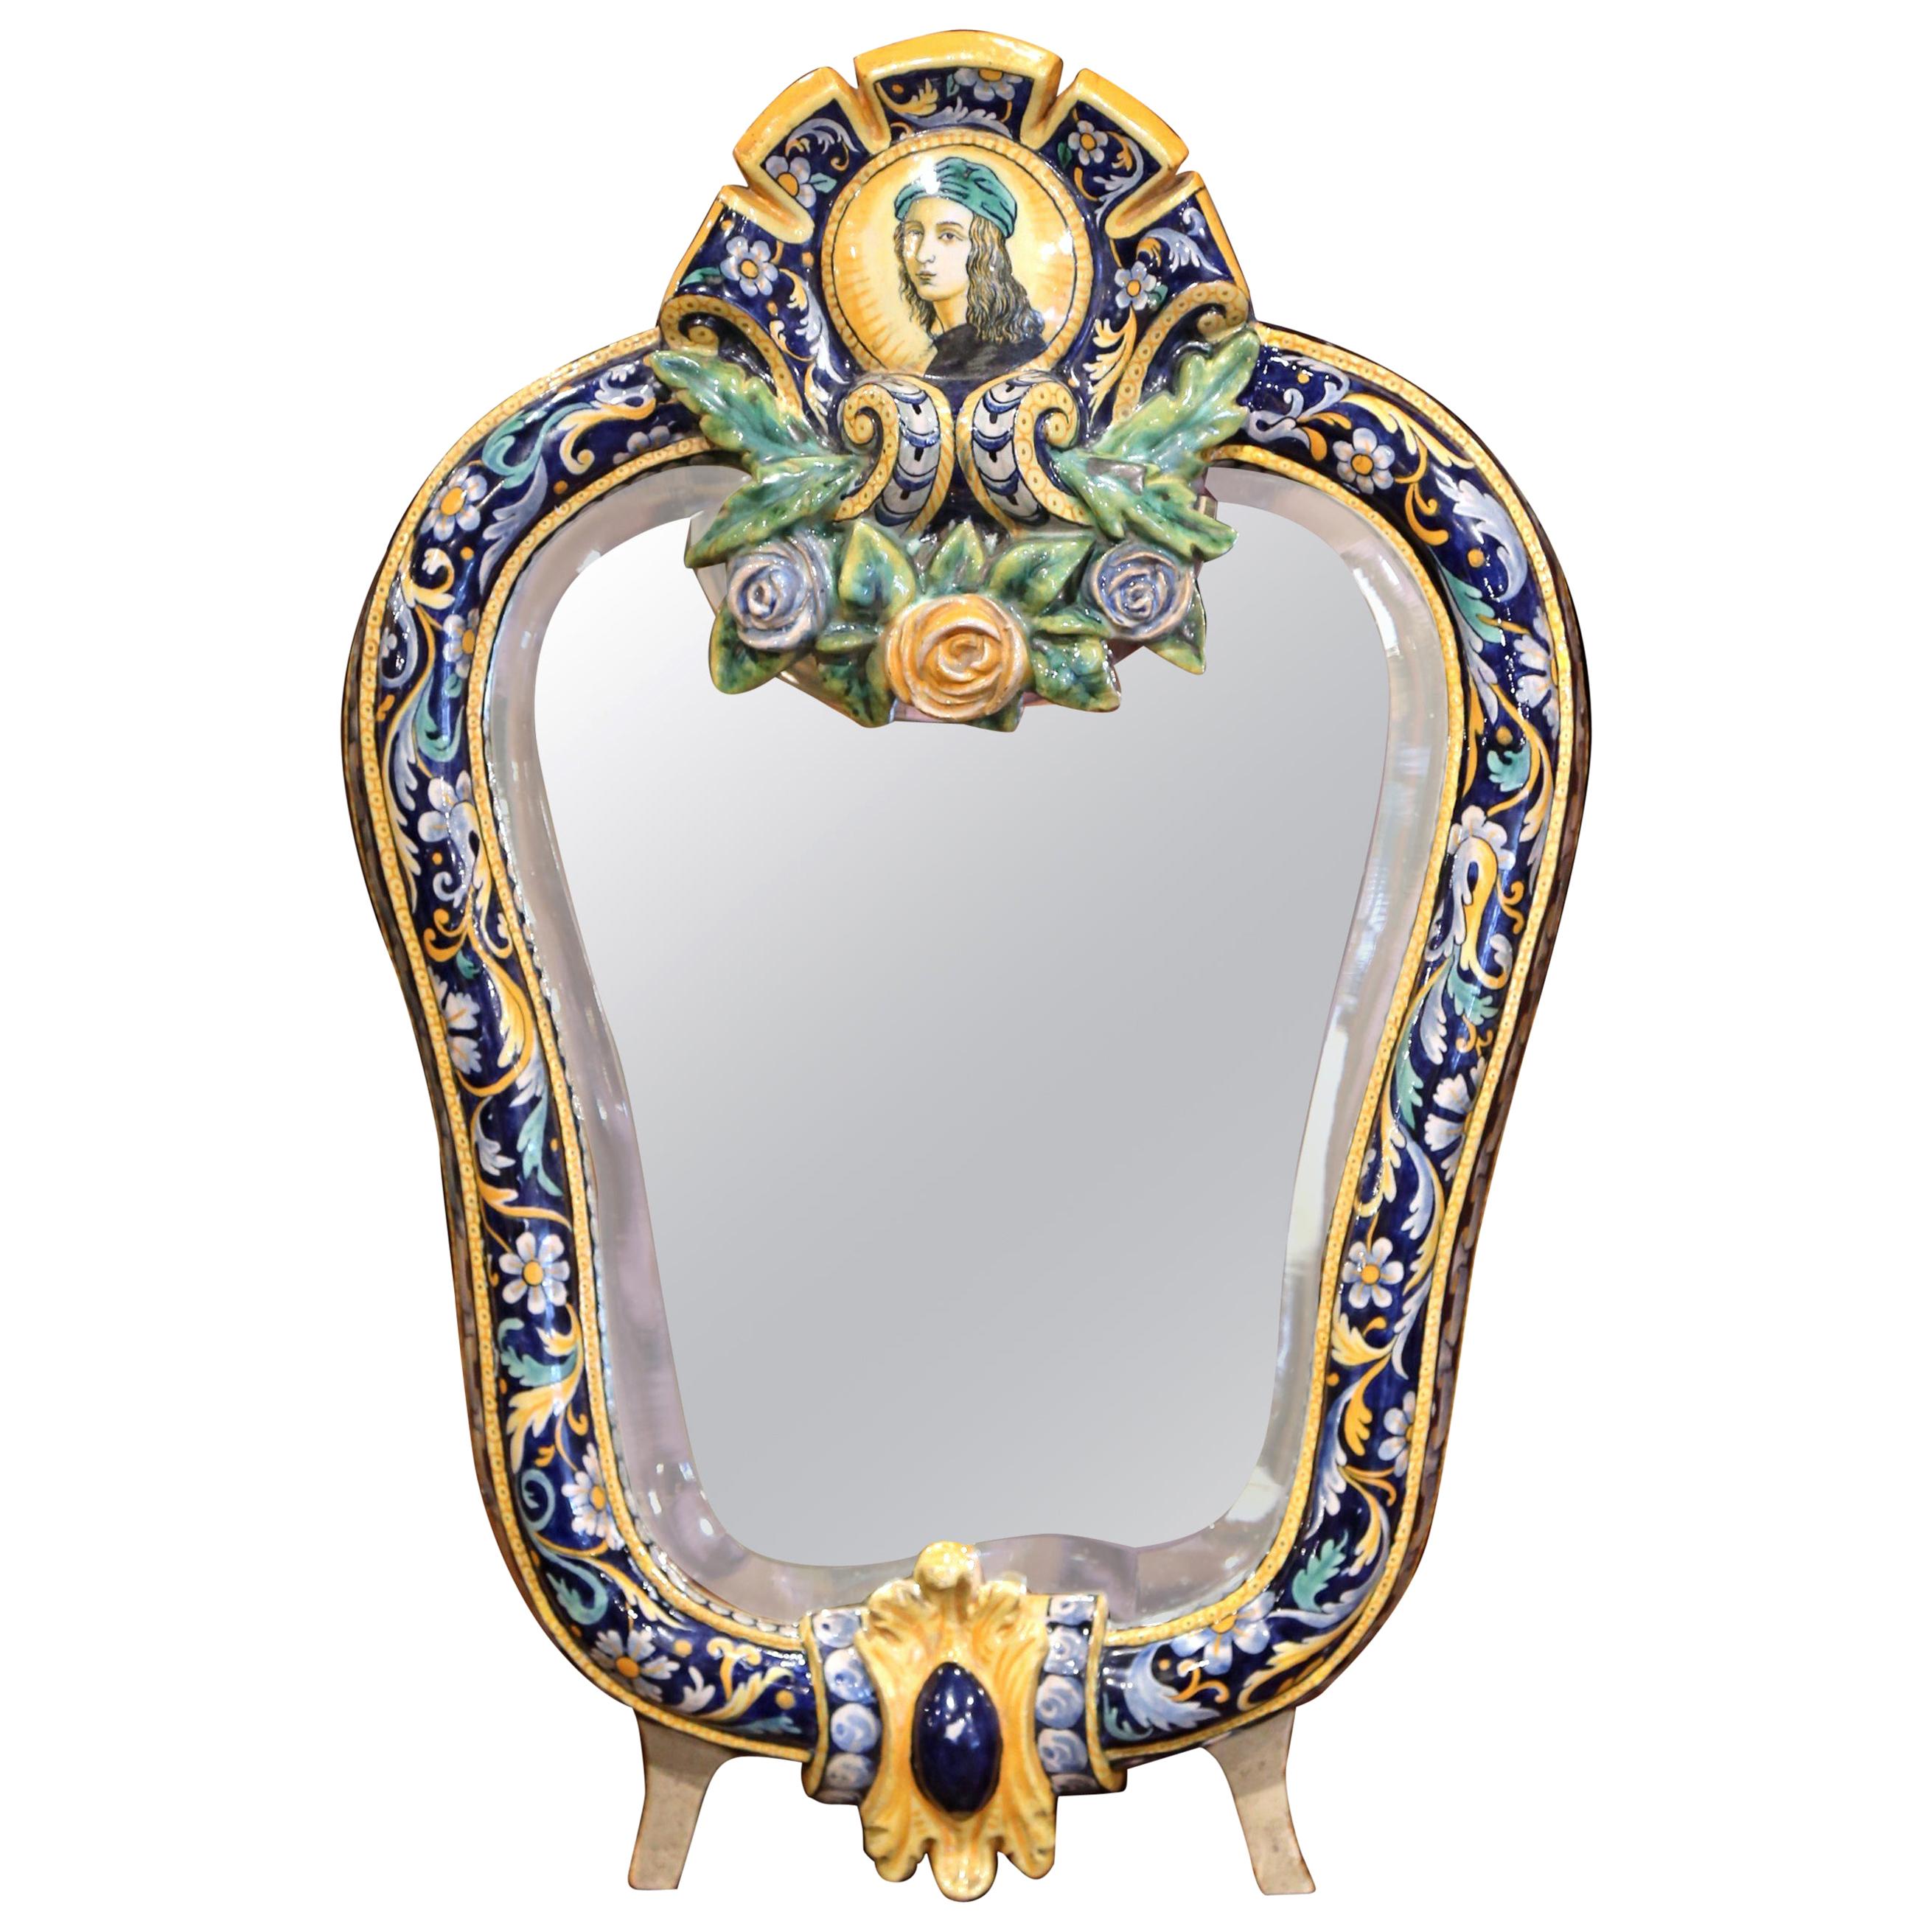 19th Century French Painted Ceramic Vanity Mirror with Joan of Arc Medallion